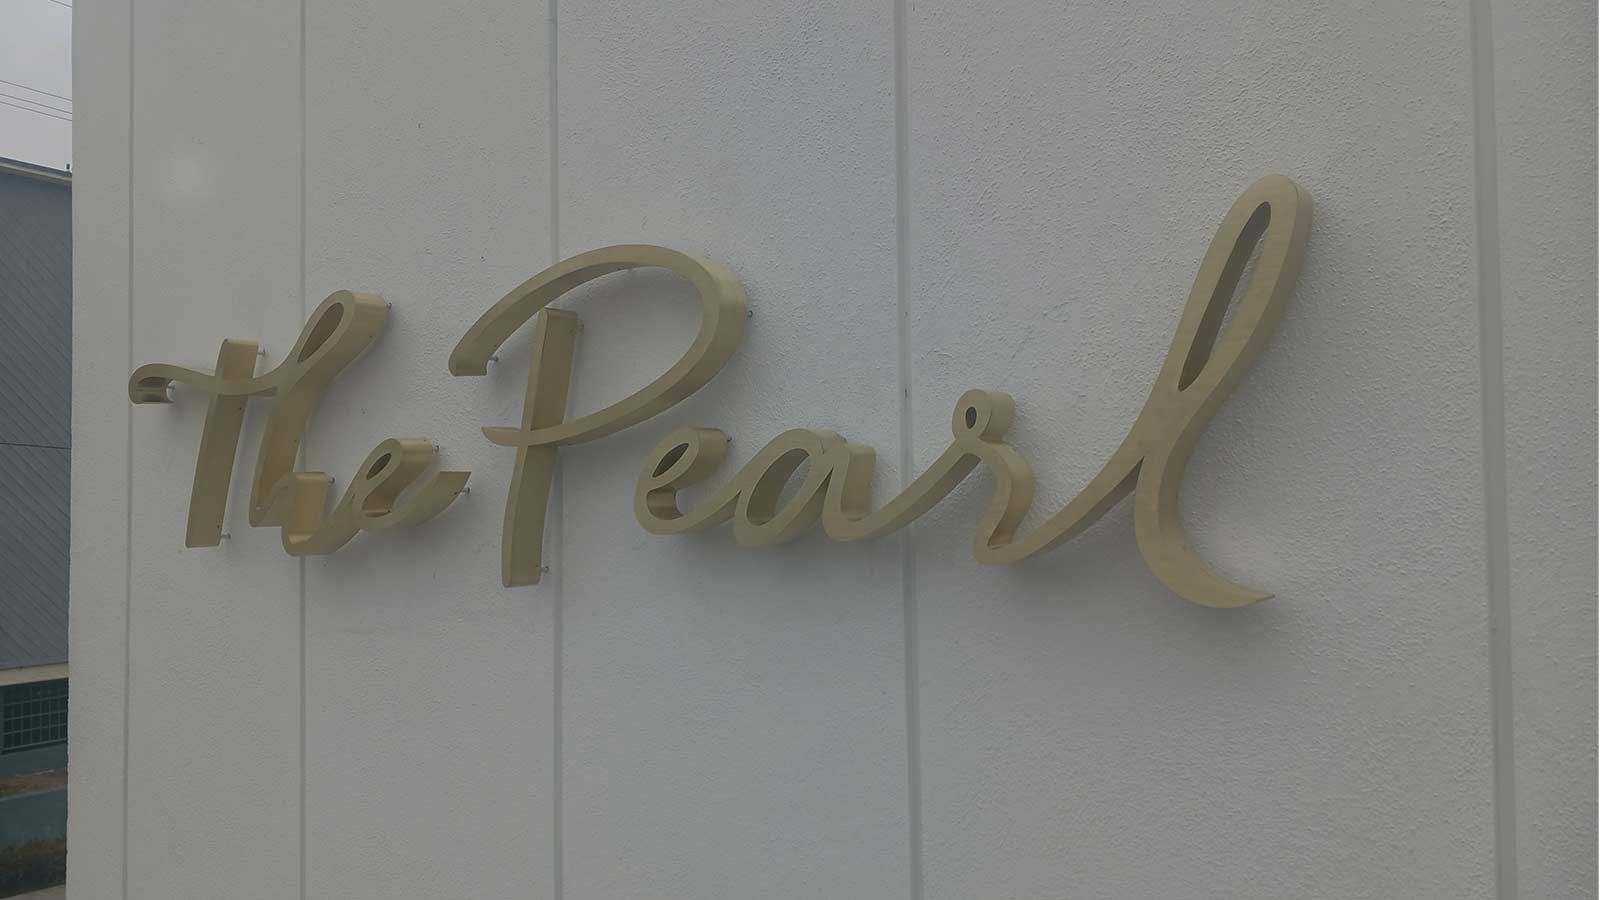 Pearl Equity Partners 3D signs attached to the wall